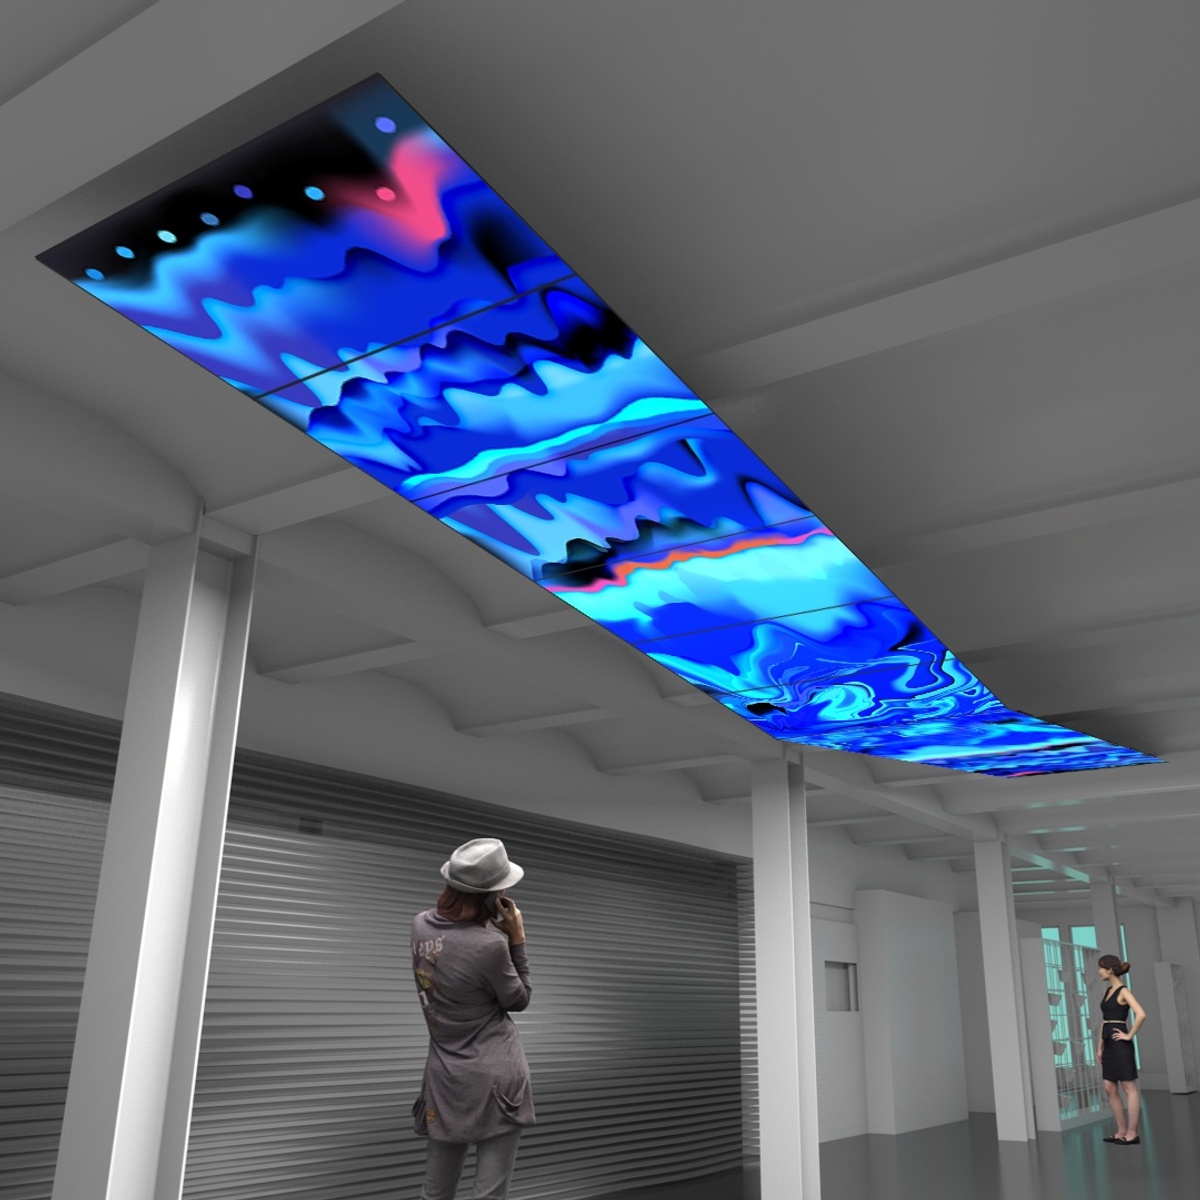 Render of people looking up at The Skywalk, which shows jagged waves of color 